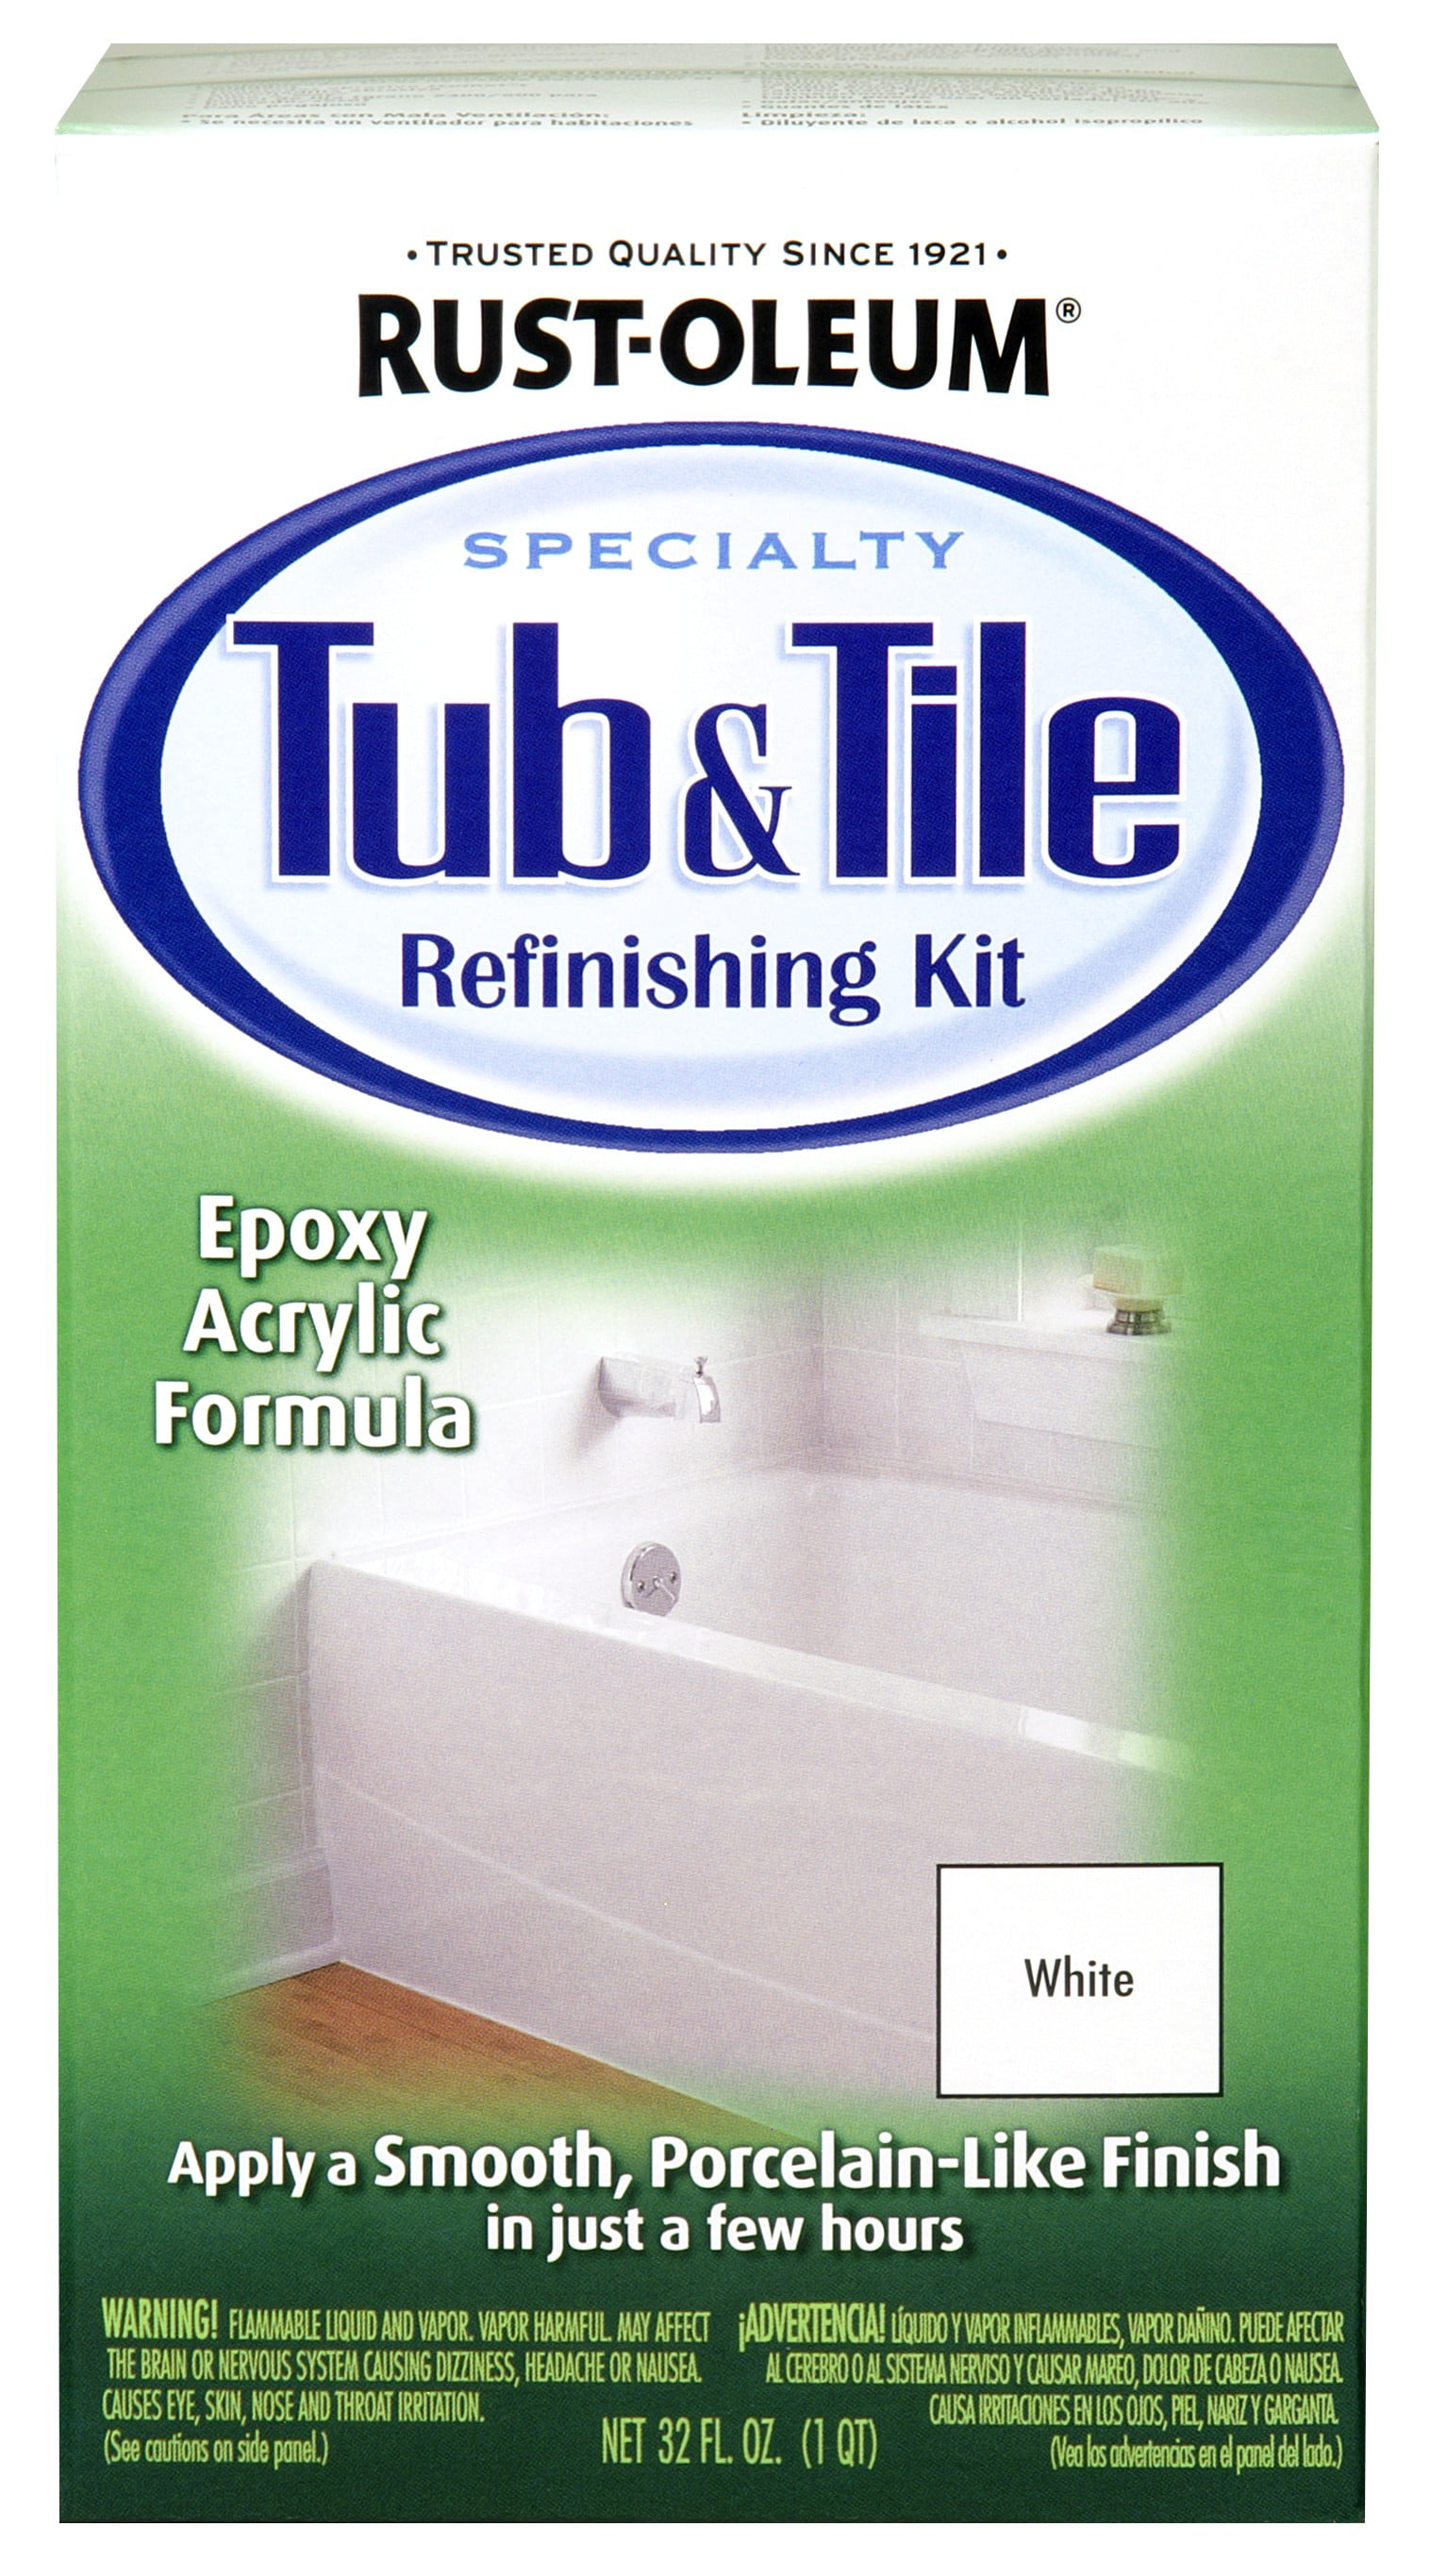 White Rust Oleum Specialty Tub Tile, Can You Use Rustoleum On A Bathtub